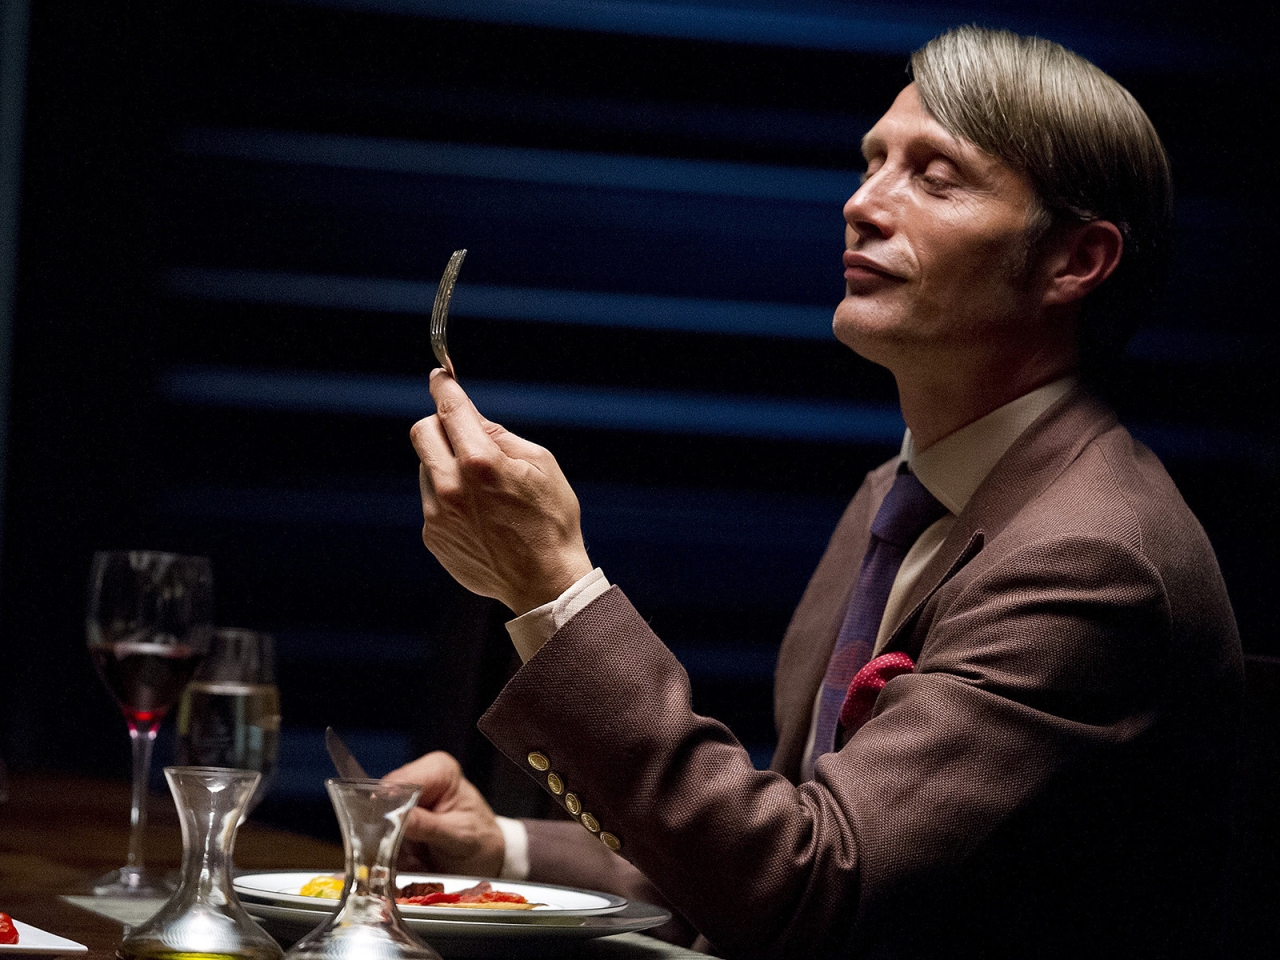 Hannibal 2013 for 1280 x 960 resolution